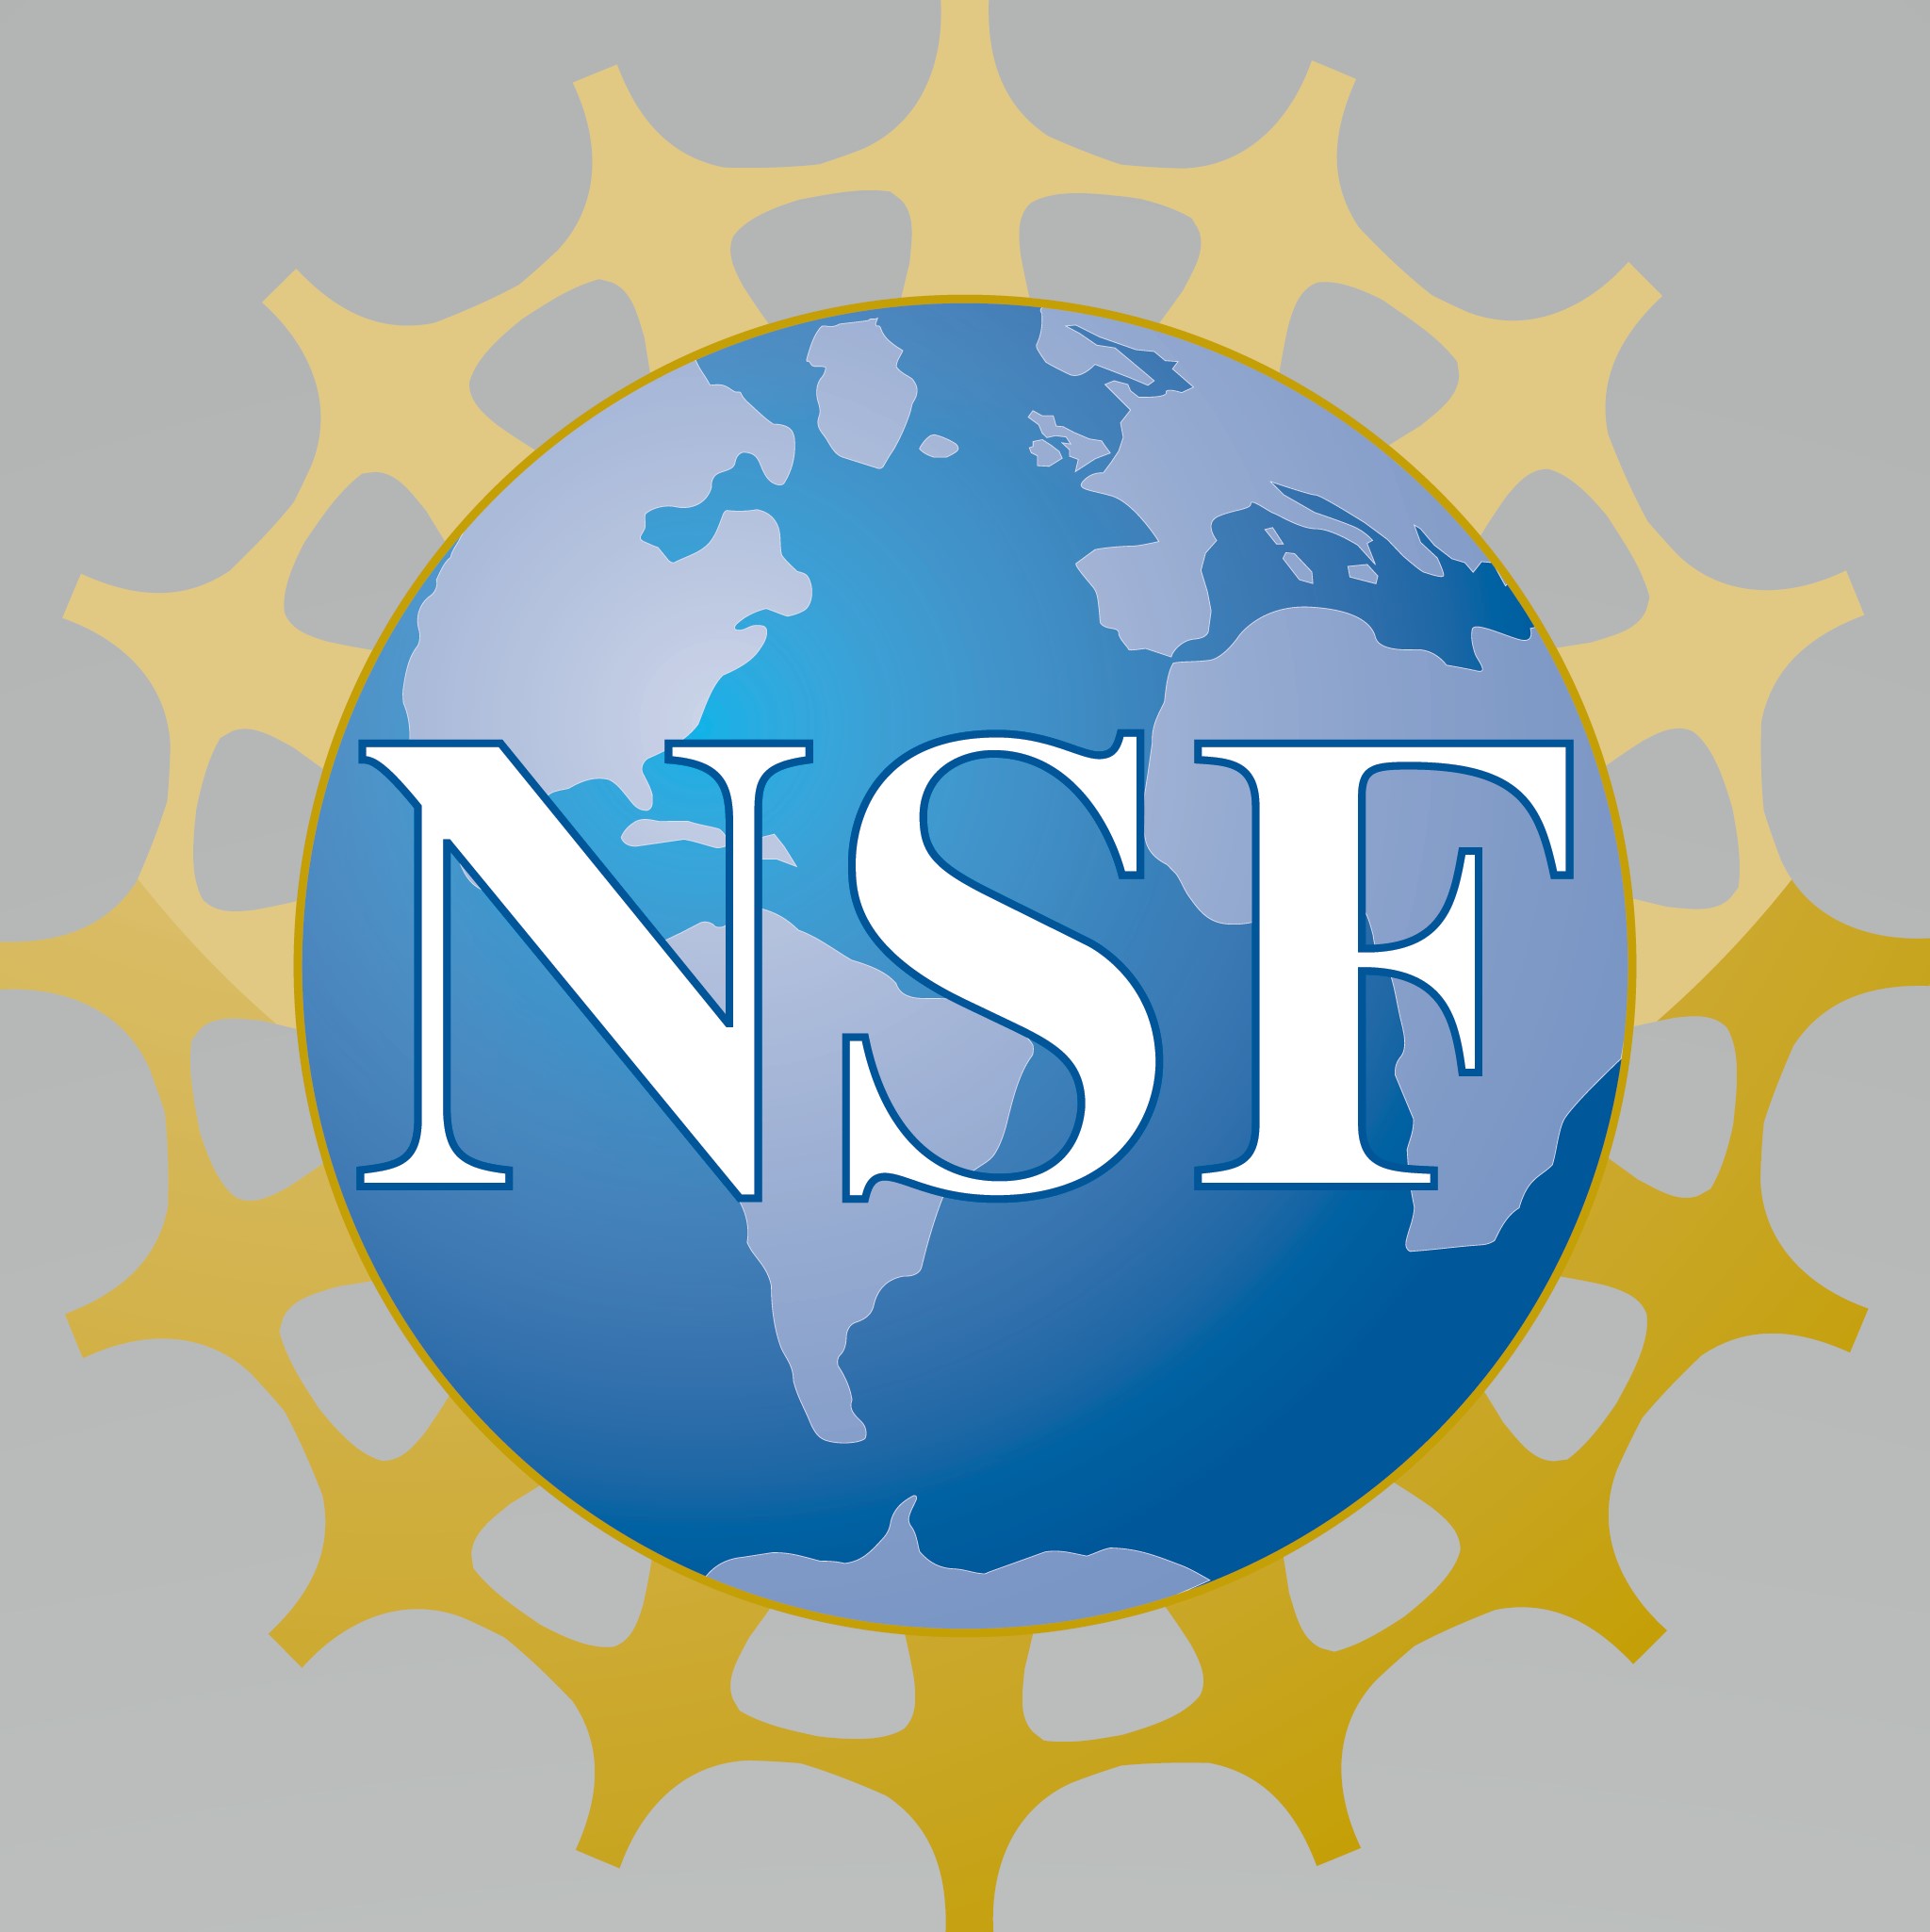 national science foundation graduate research fellowship acceptance rate